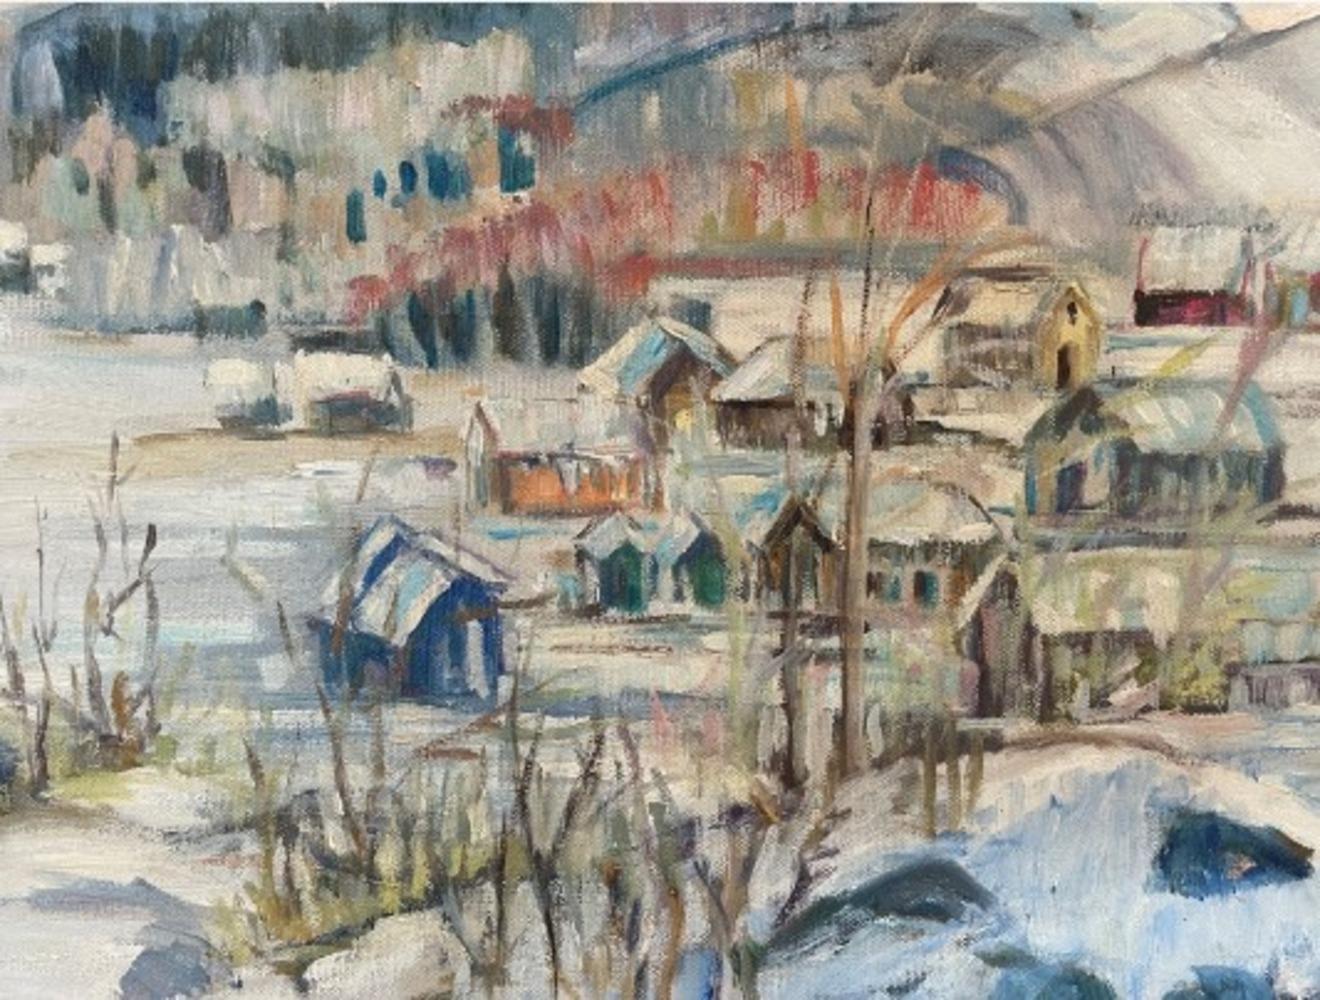 Aldro T. Hibbard
Winter in the Valley
Signed lower right
Oil on canvas
24 x 30 inches


Born in Falmouth, Massachusetts, Aldro Hibbard was an Impressionist landscape painter much concerned with light and shadow.  He was one of the founders of the